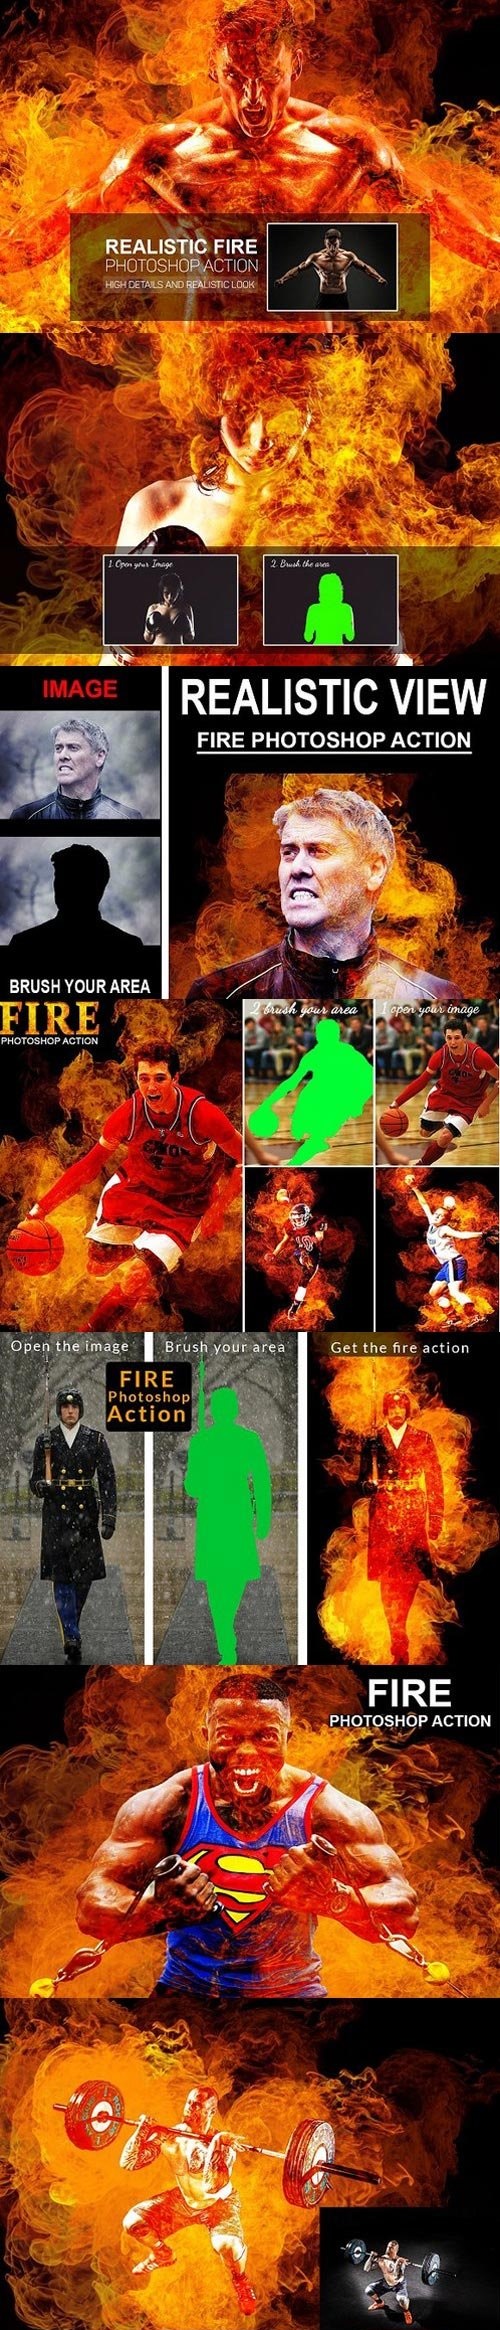 Realistic Fire Photoshop Action 1518270